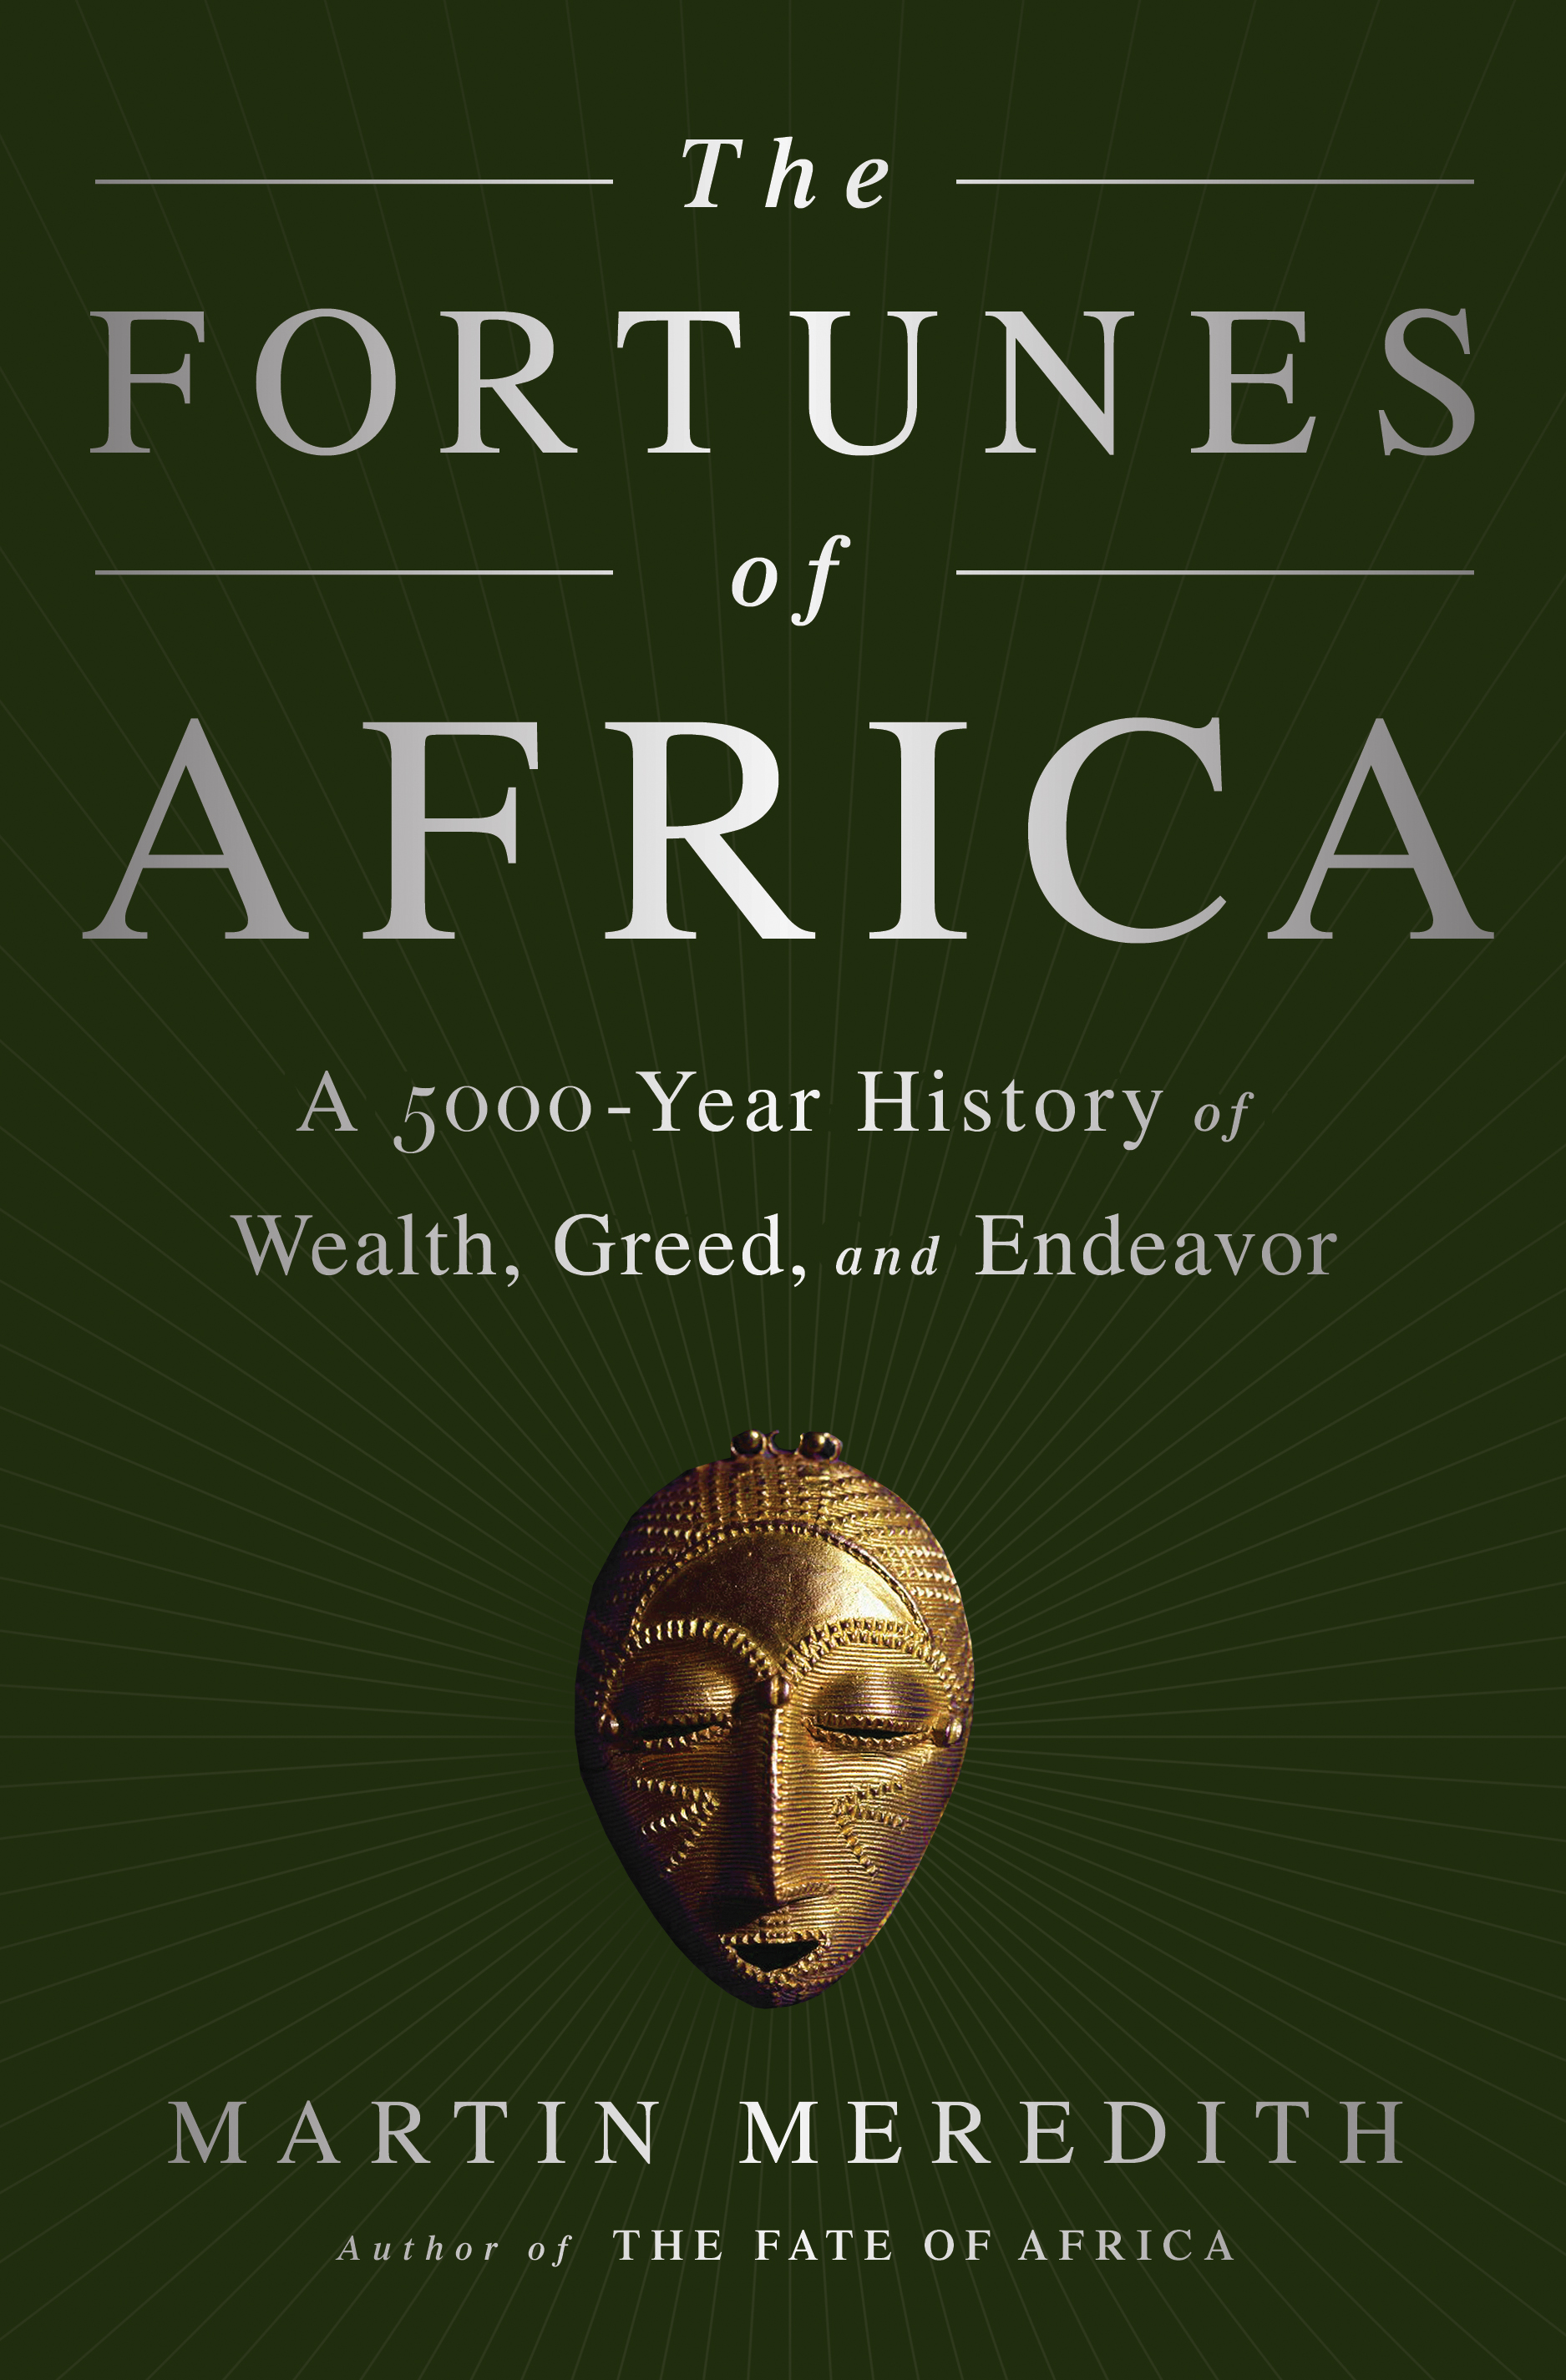 of　Africa　Book　The　Martin　Meredith　Hachette　Group　Fortunes　by